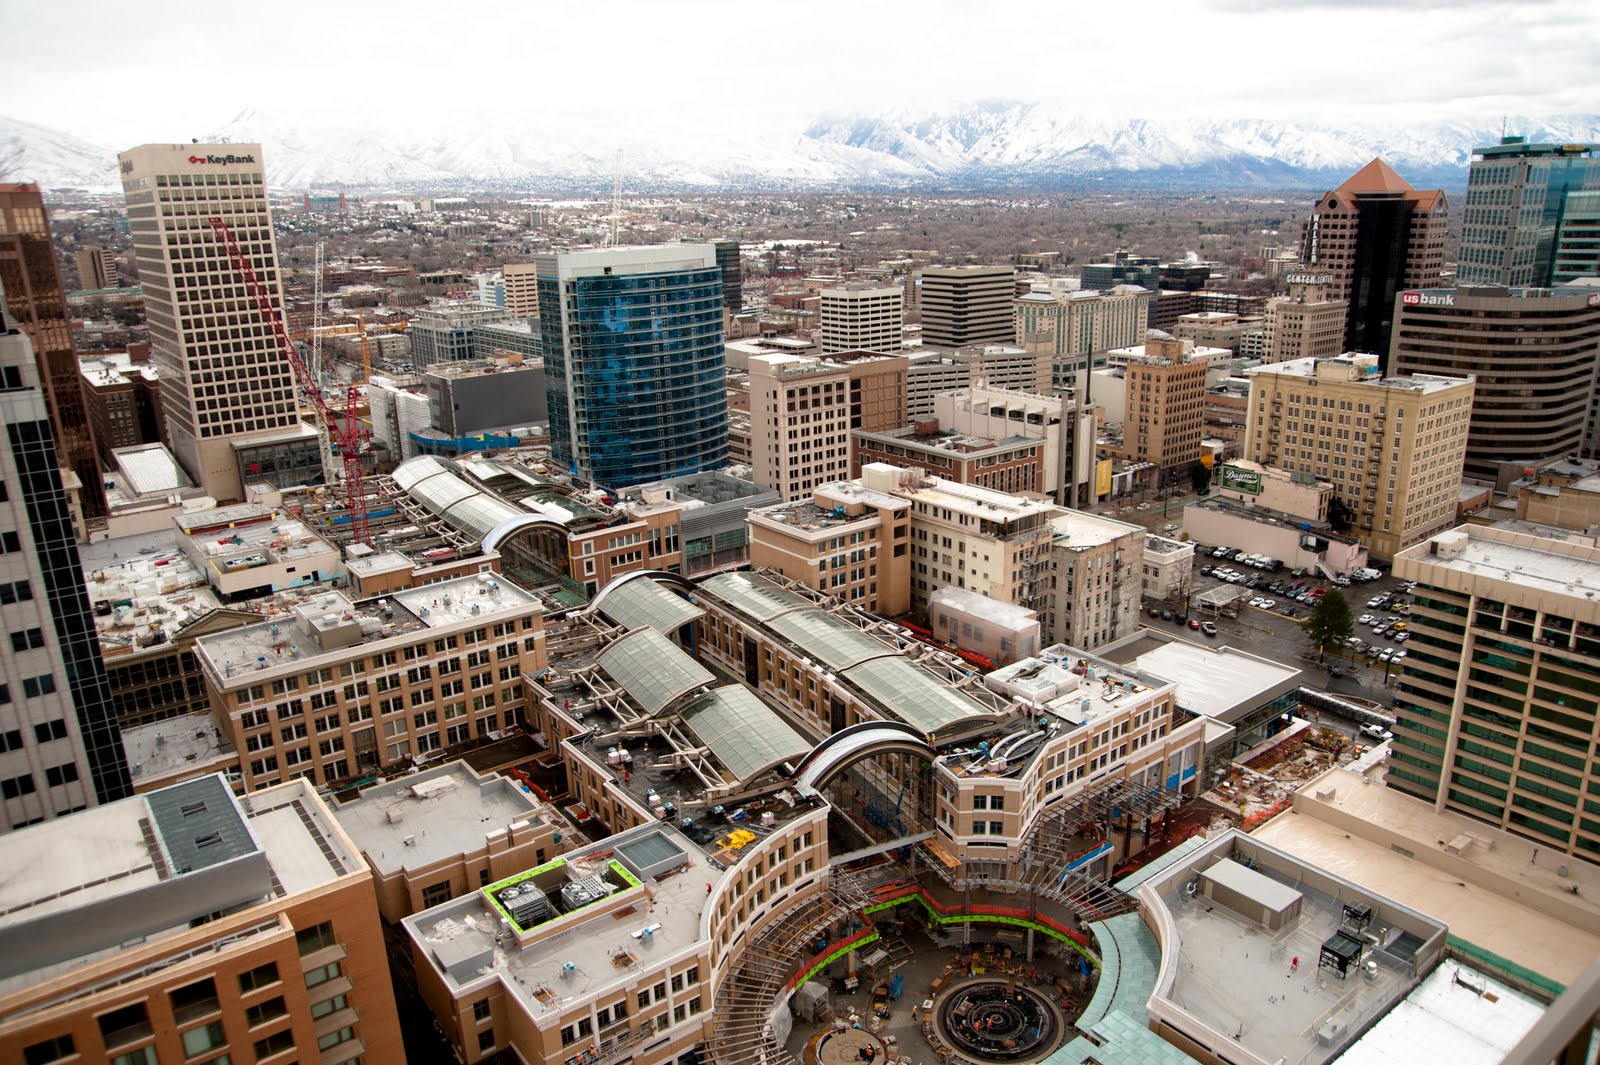 Utah ranks as one of the fastest-growing states for tech jobs, and is home to more than 6,500 tech-focused companies